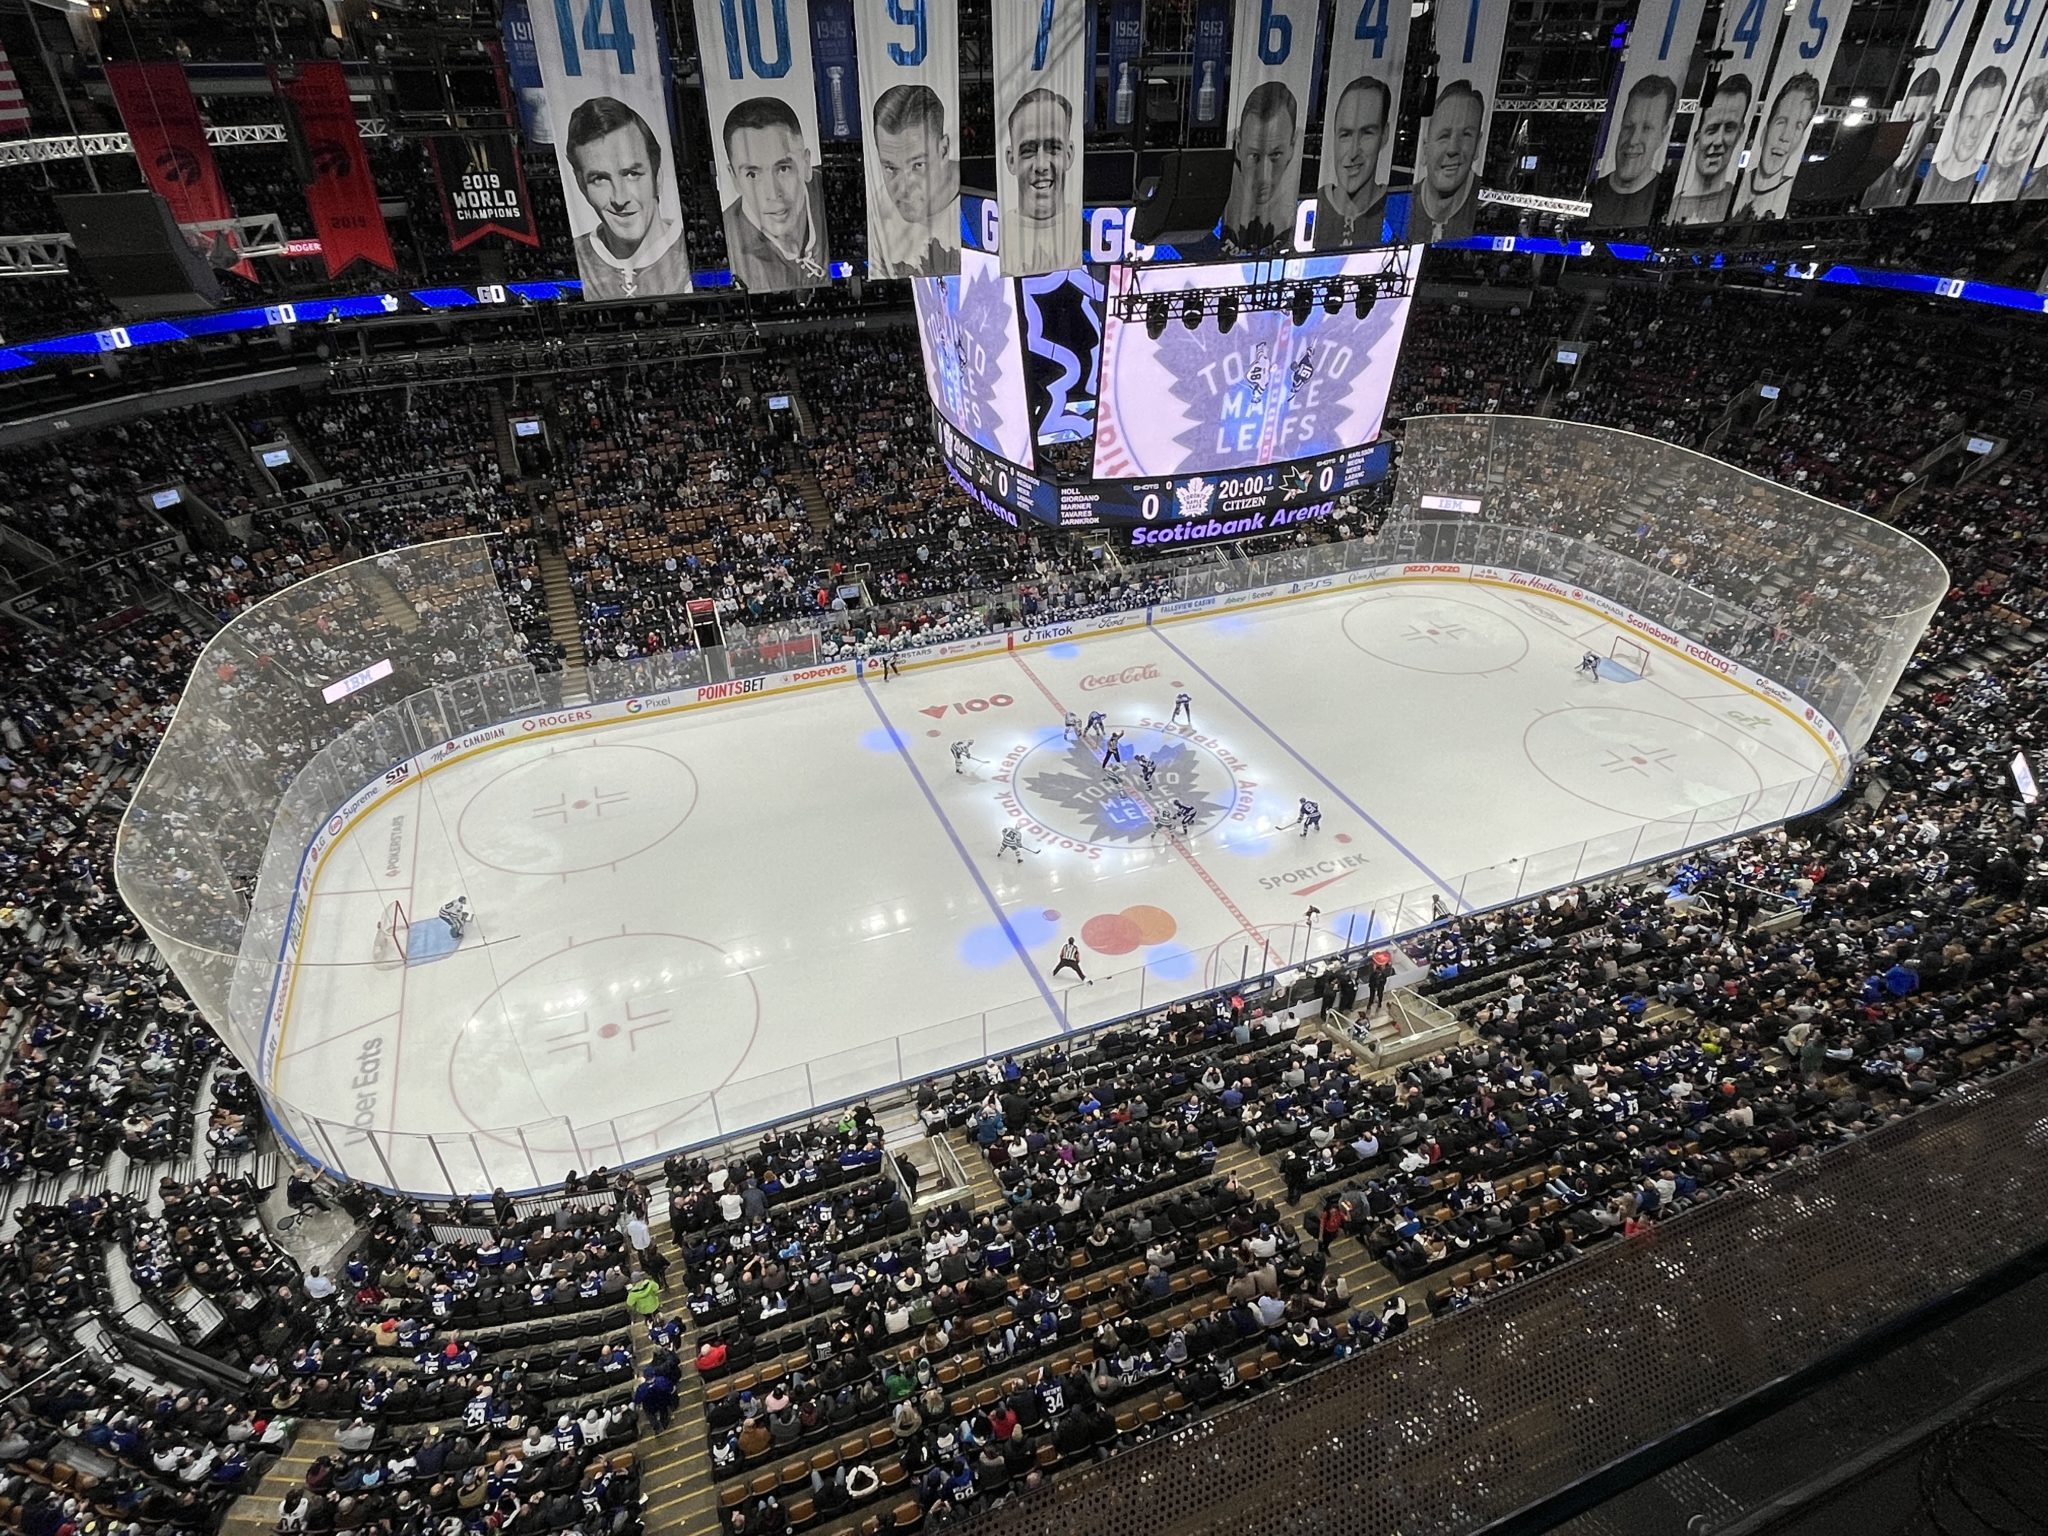 Toronto Maple Leafs can play at Scotiabank Arena 